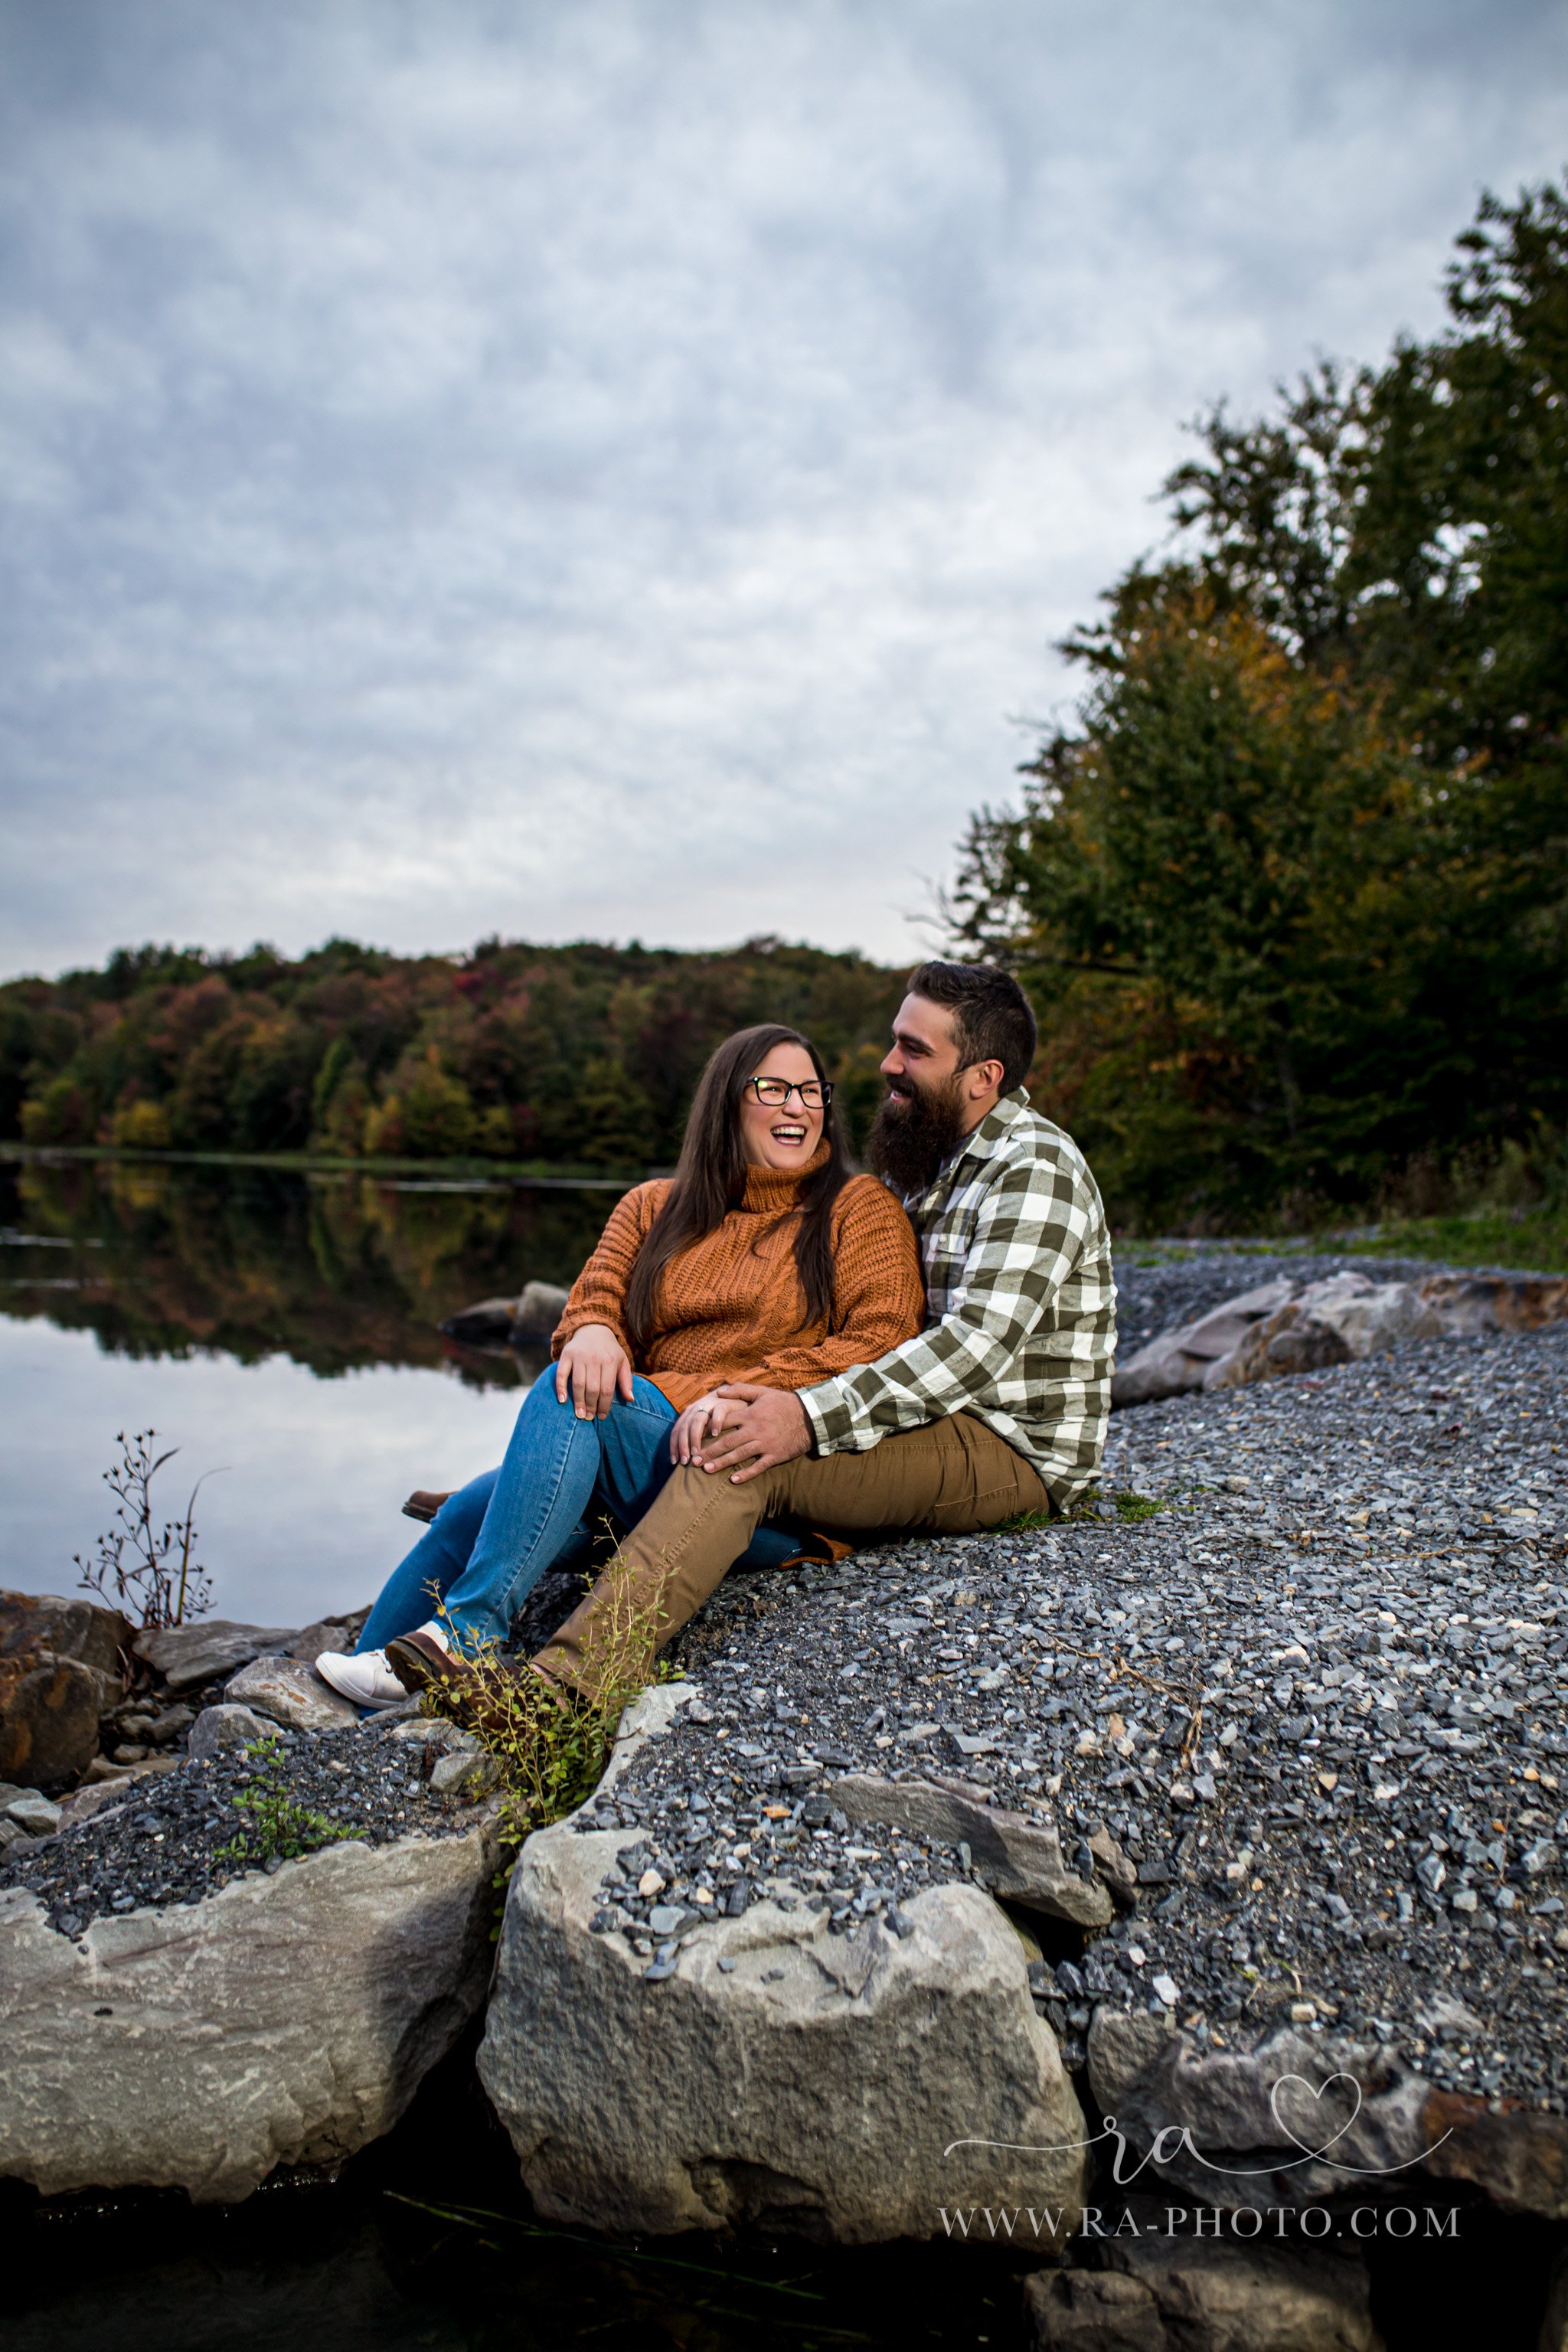 037-MGS-FALLS-CREEK-PA-ENGAGEMENT-PICTURES.jpg